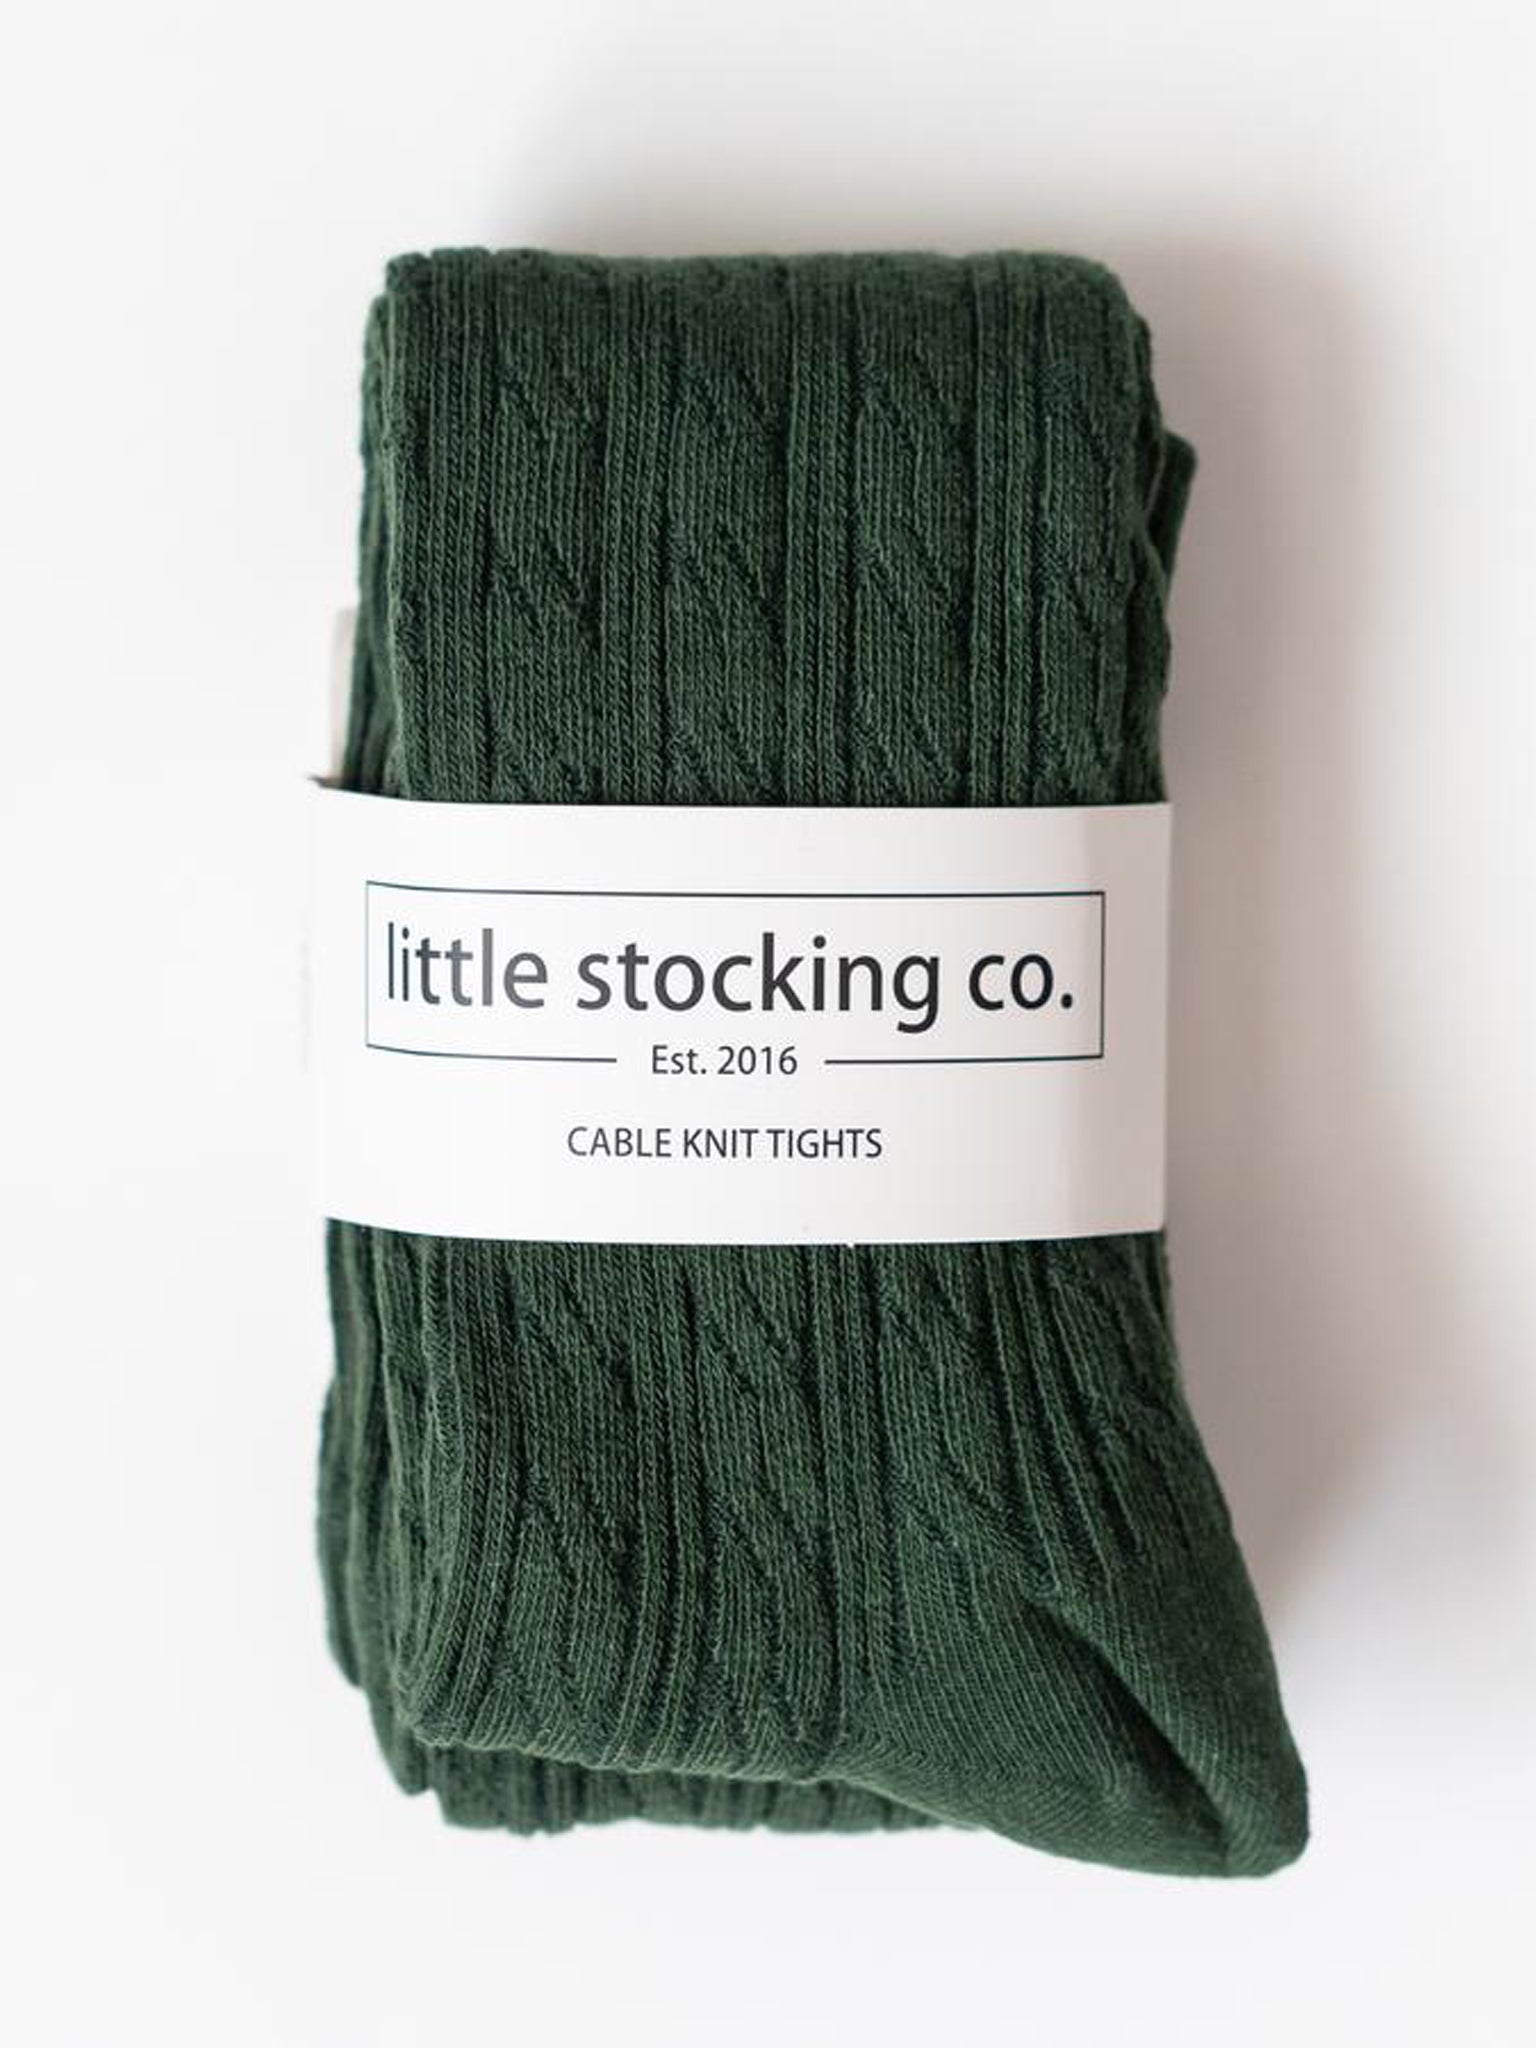 Little Stocking Co. - Gray Cable Knit Tights